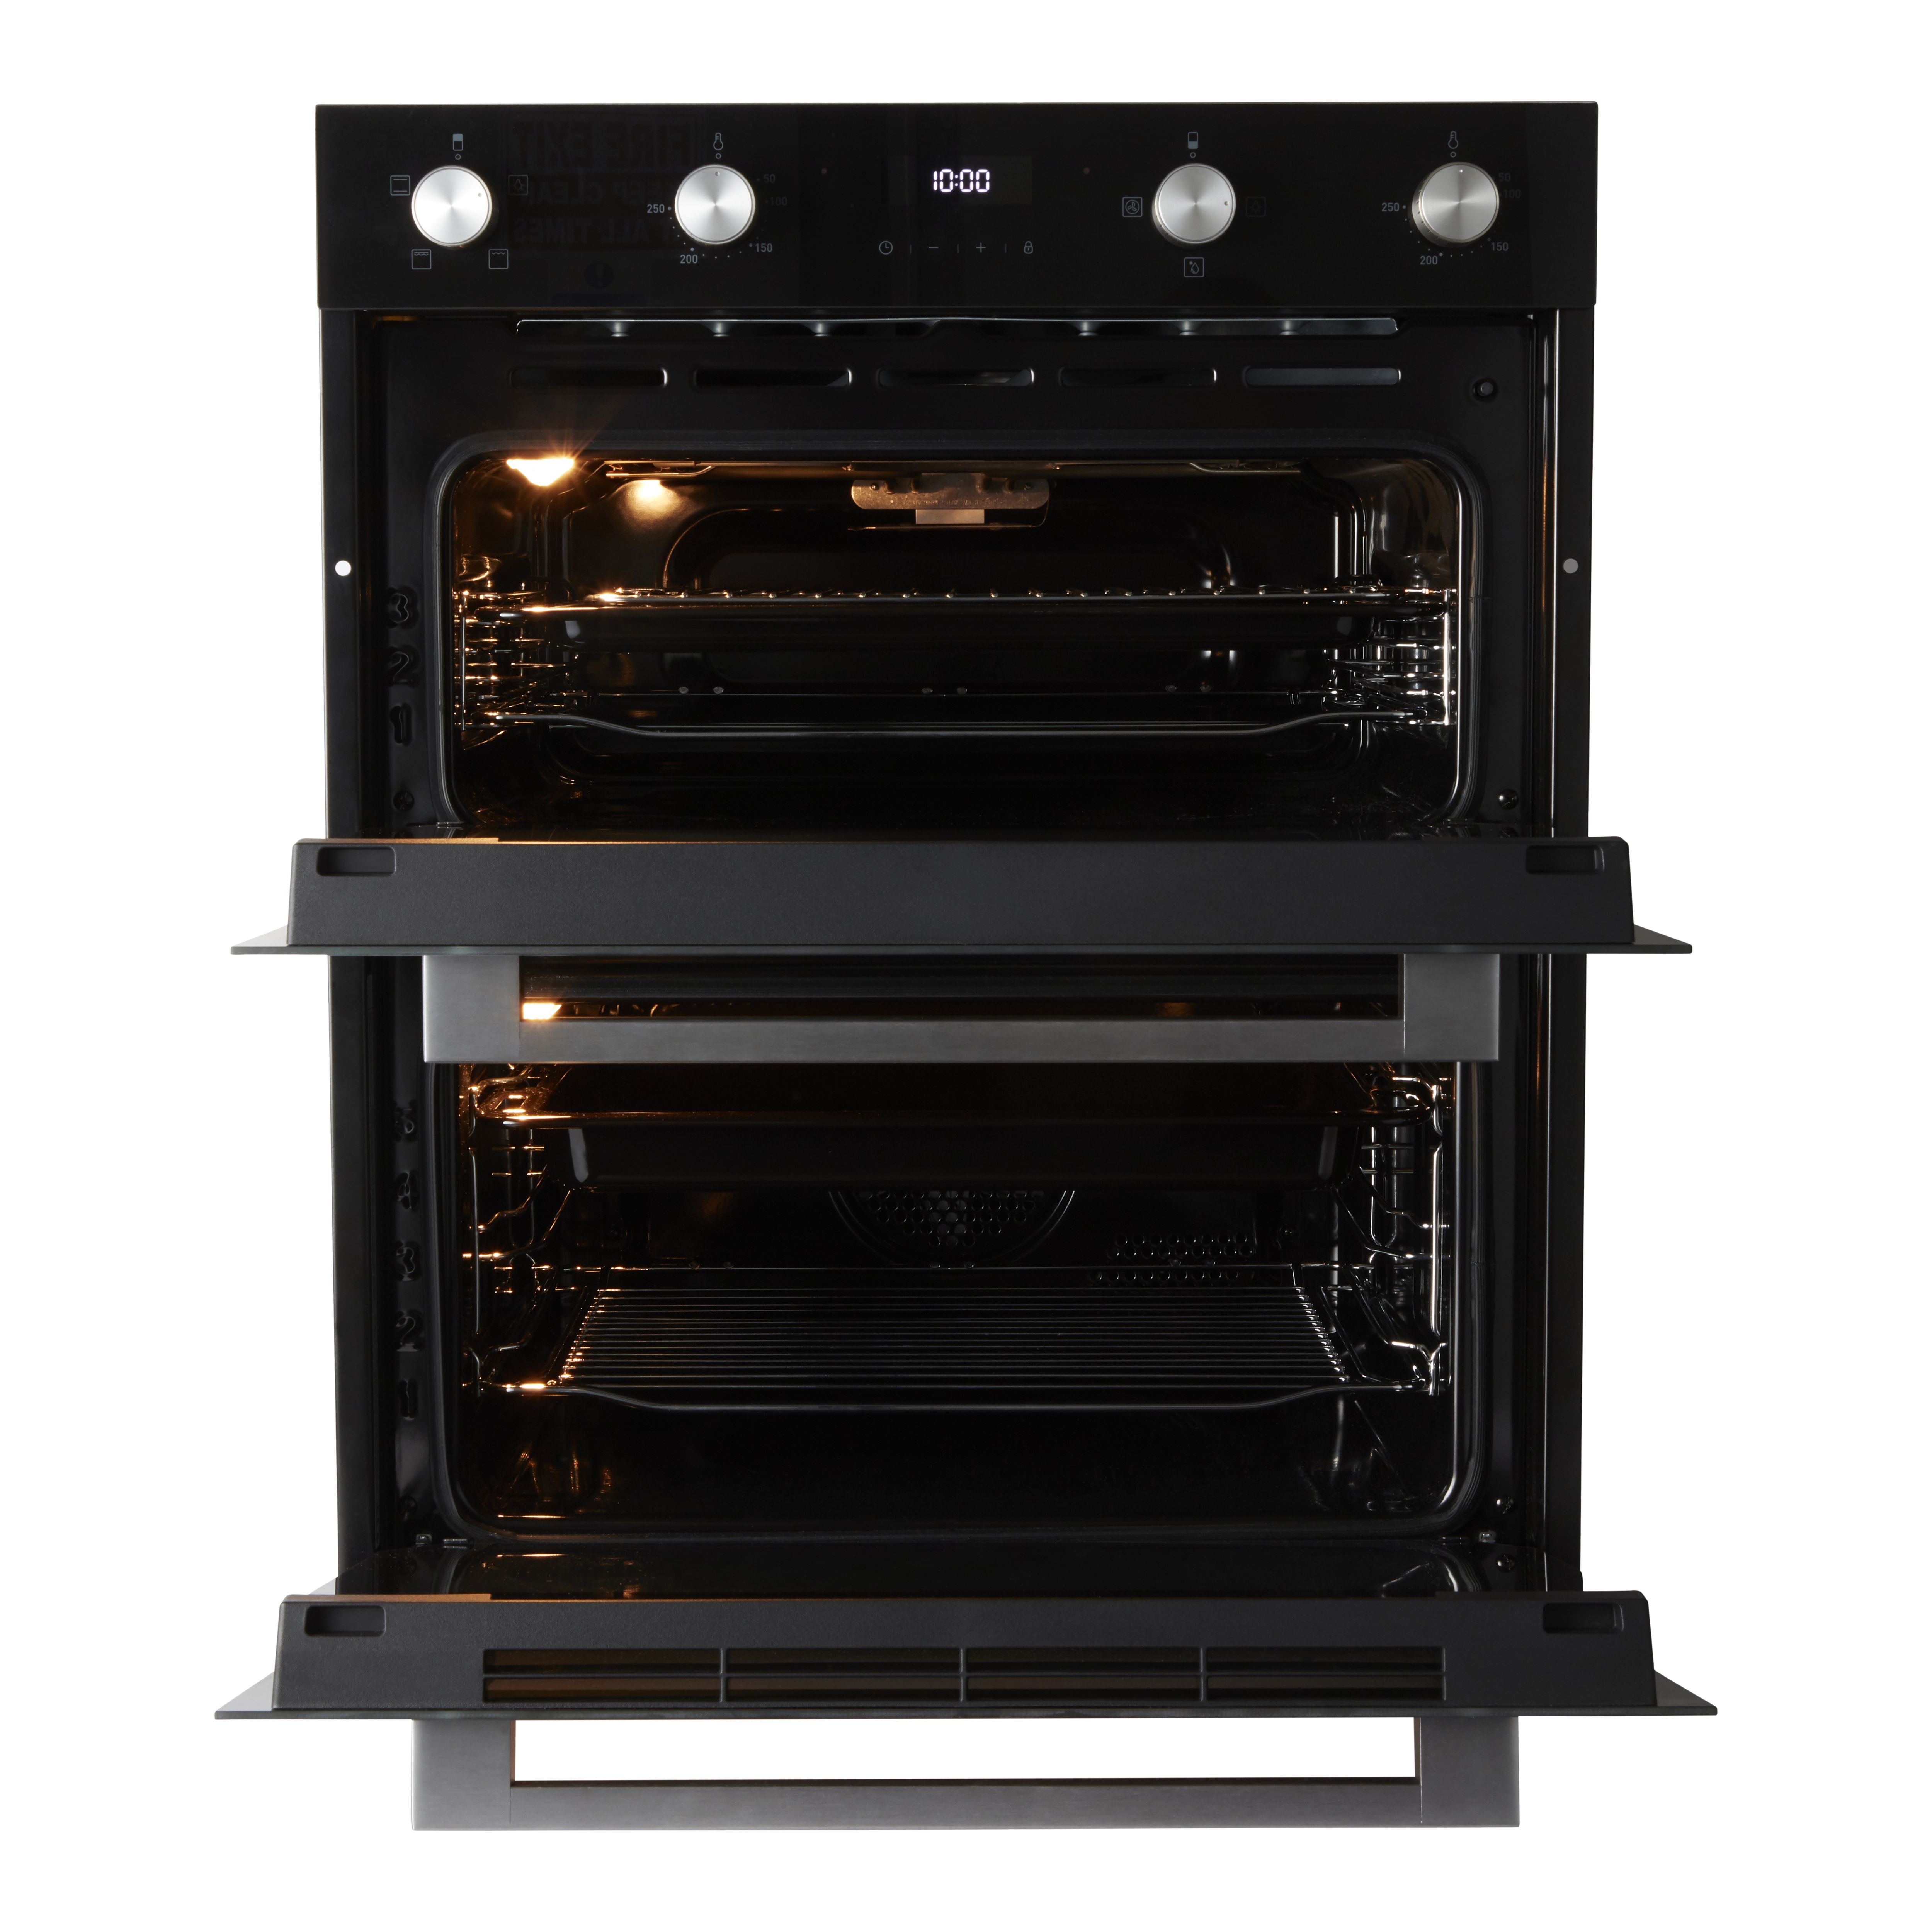 Cooke & Lewis CLBUDO89 Built-in Double oven - Mirrored black